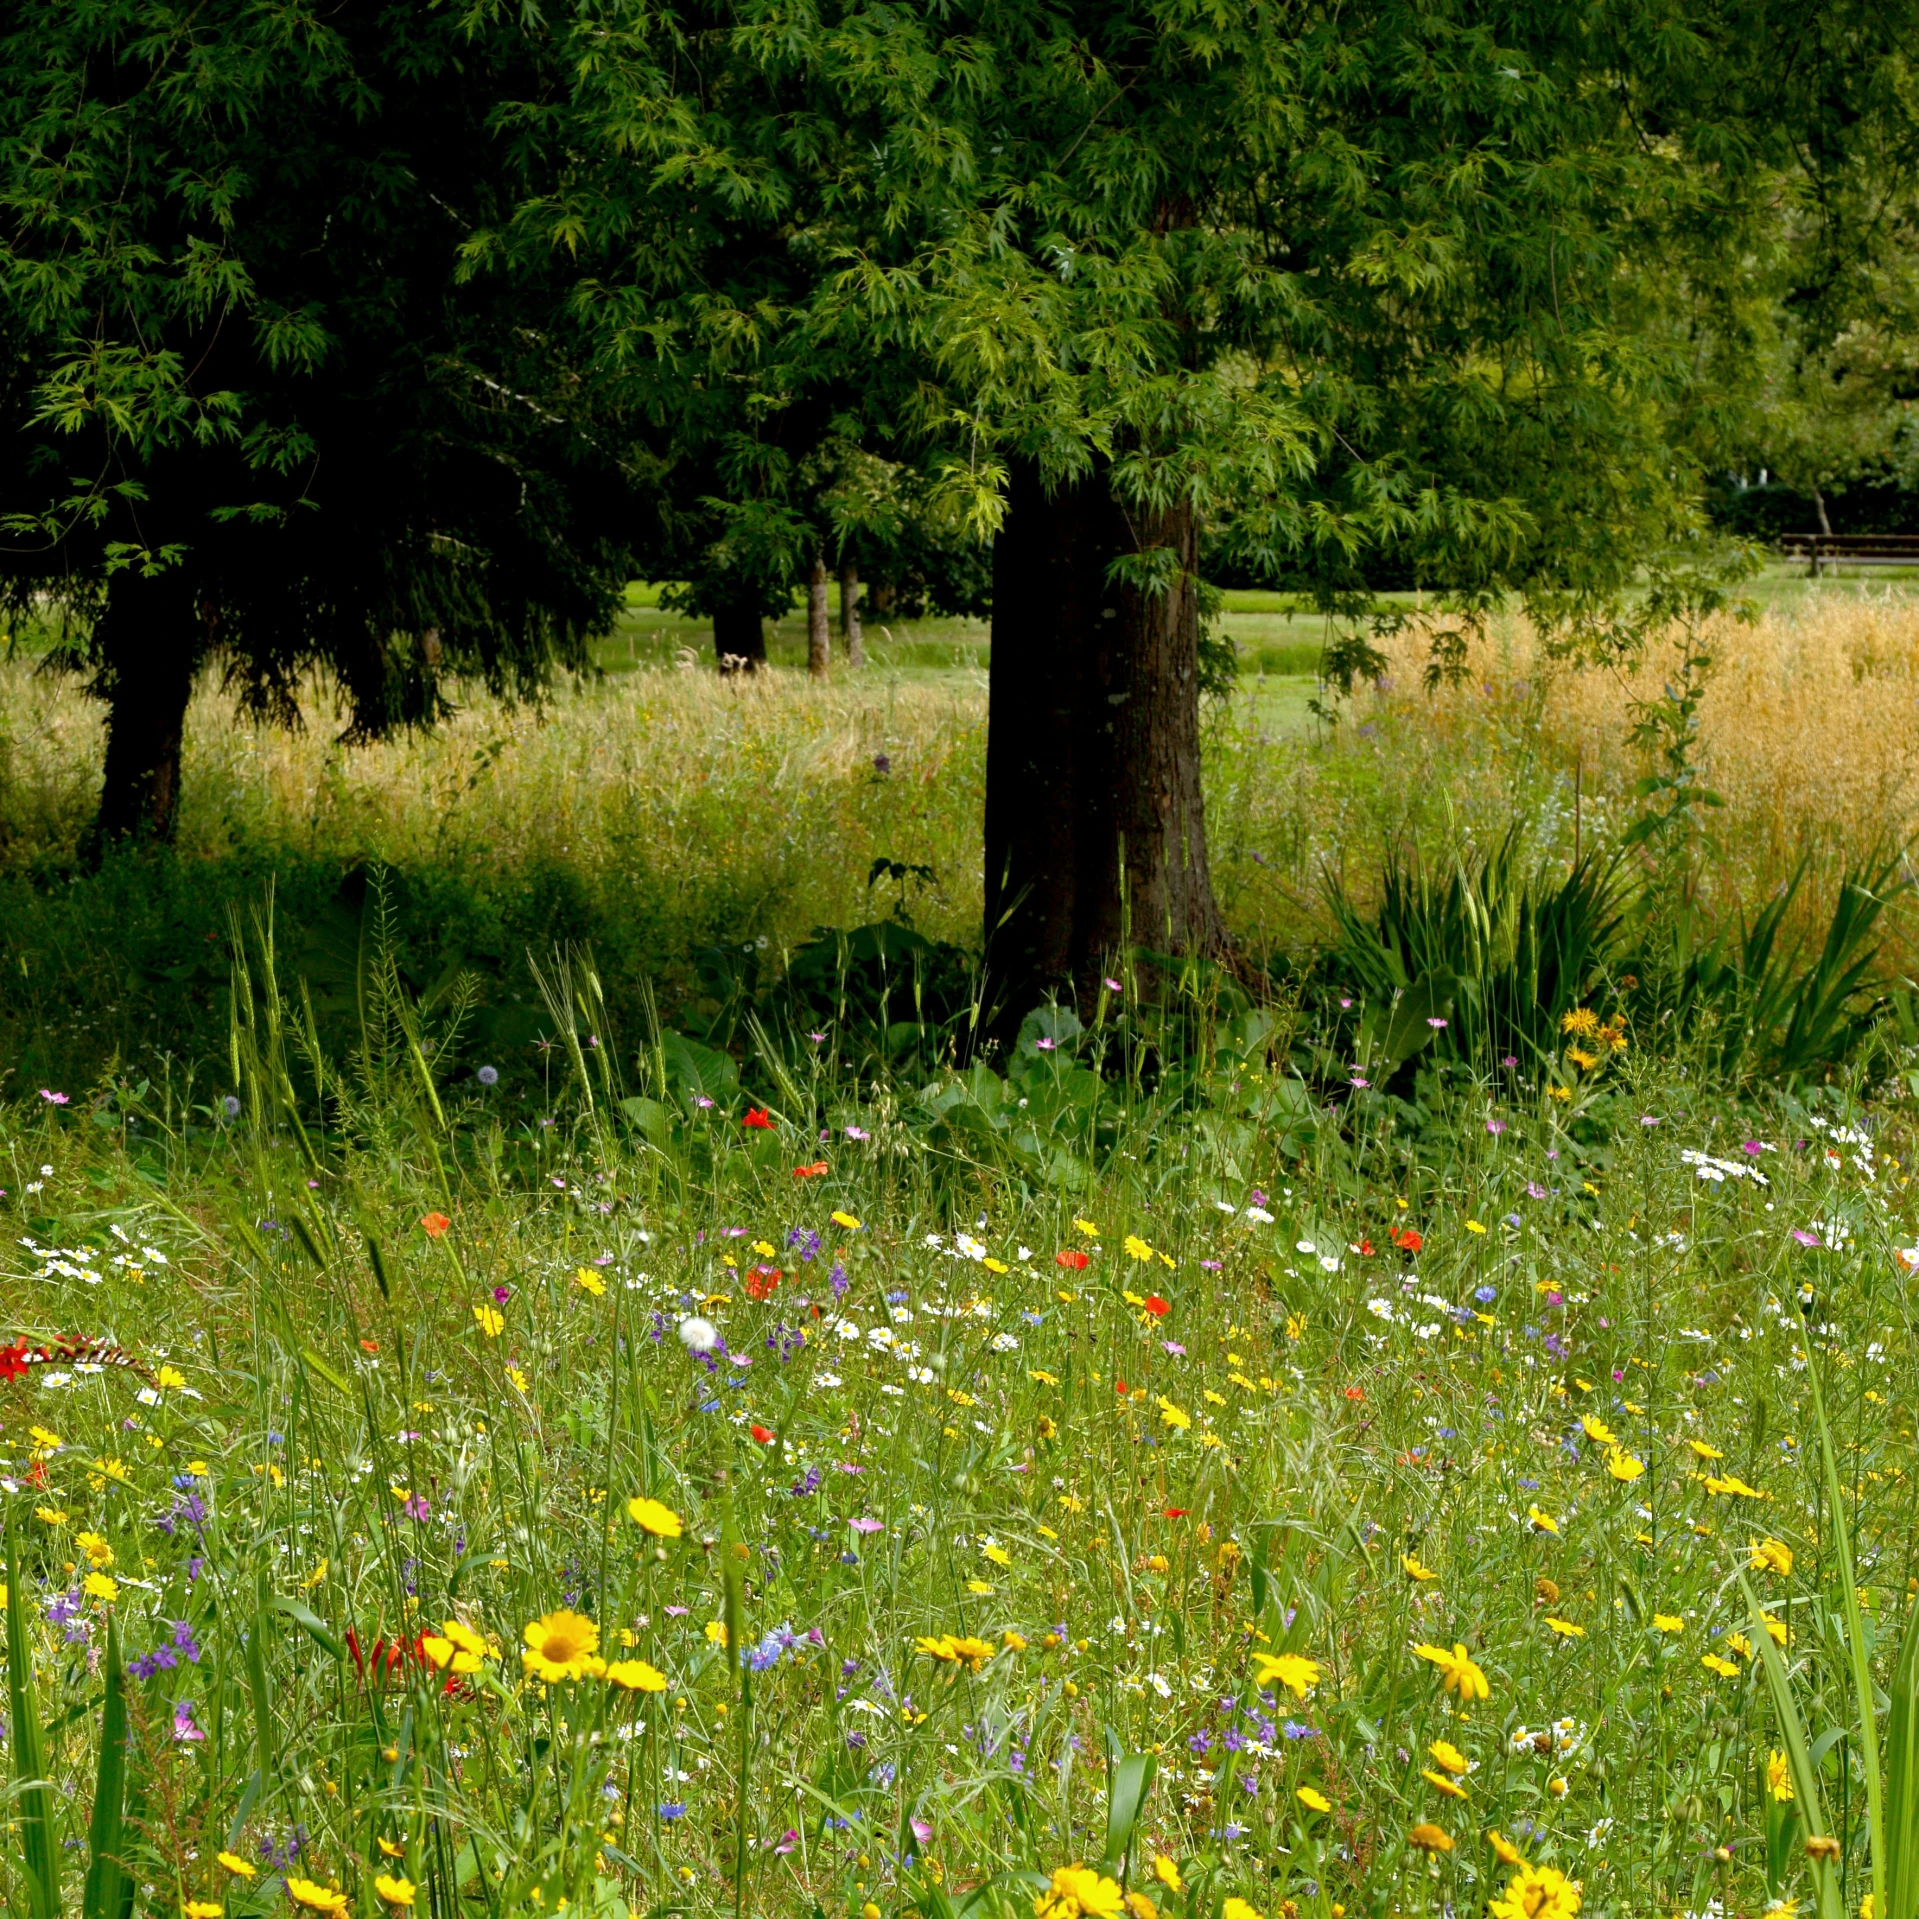 a grassy field with flowers, trees and grass